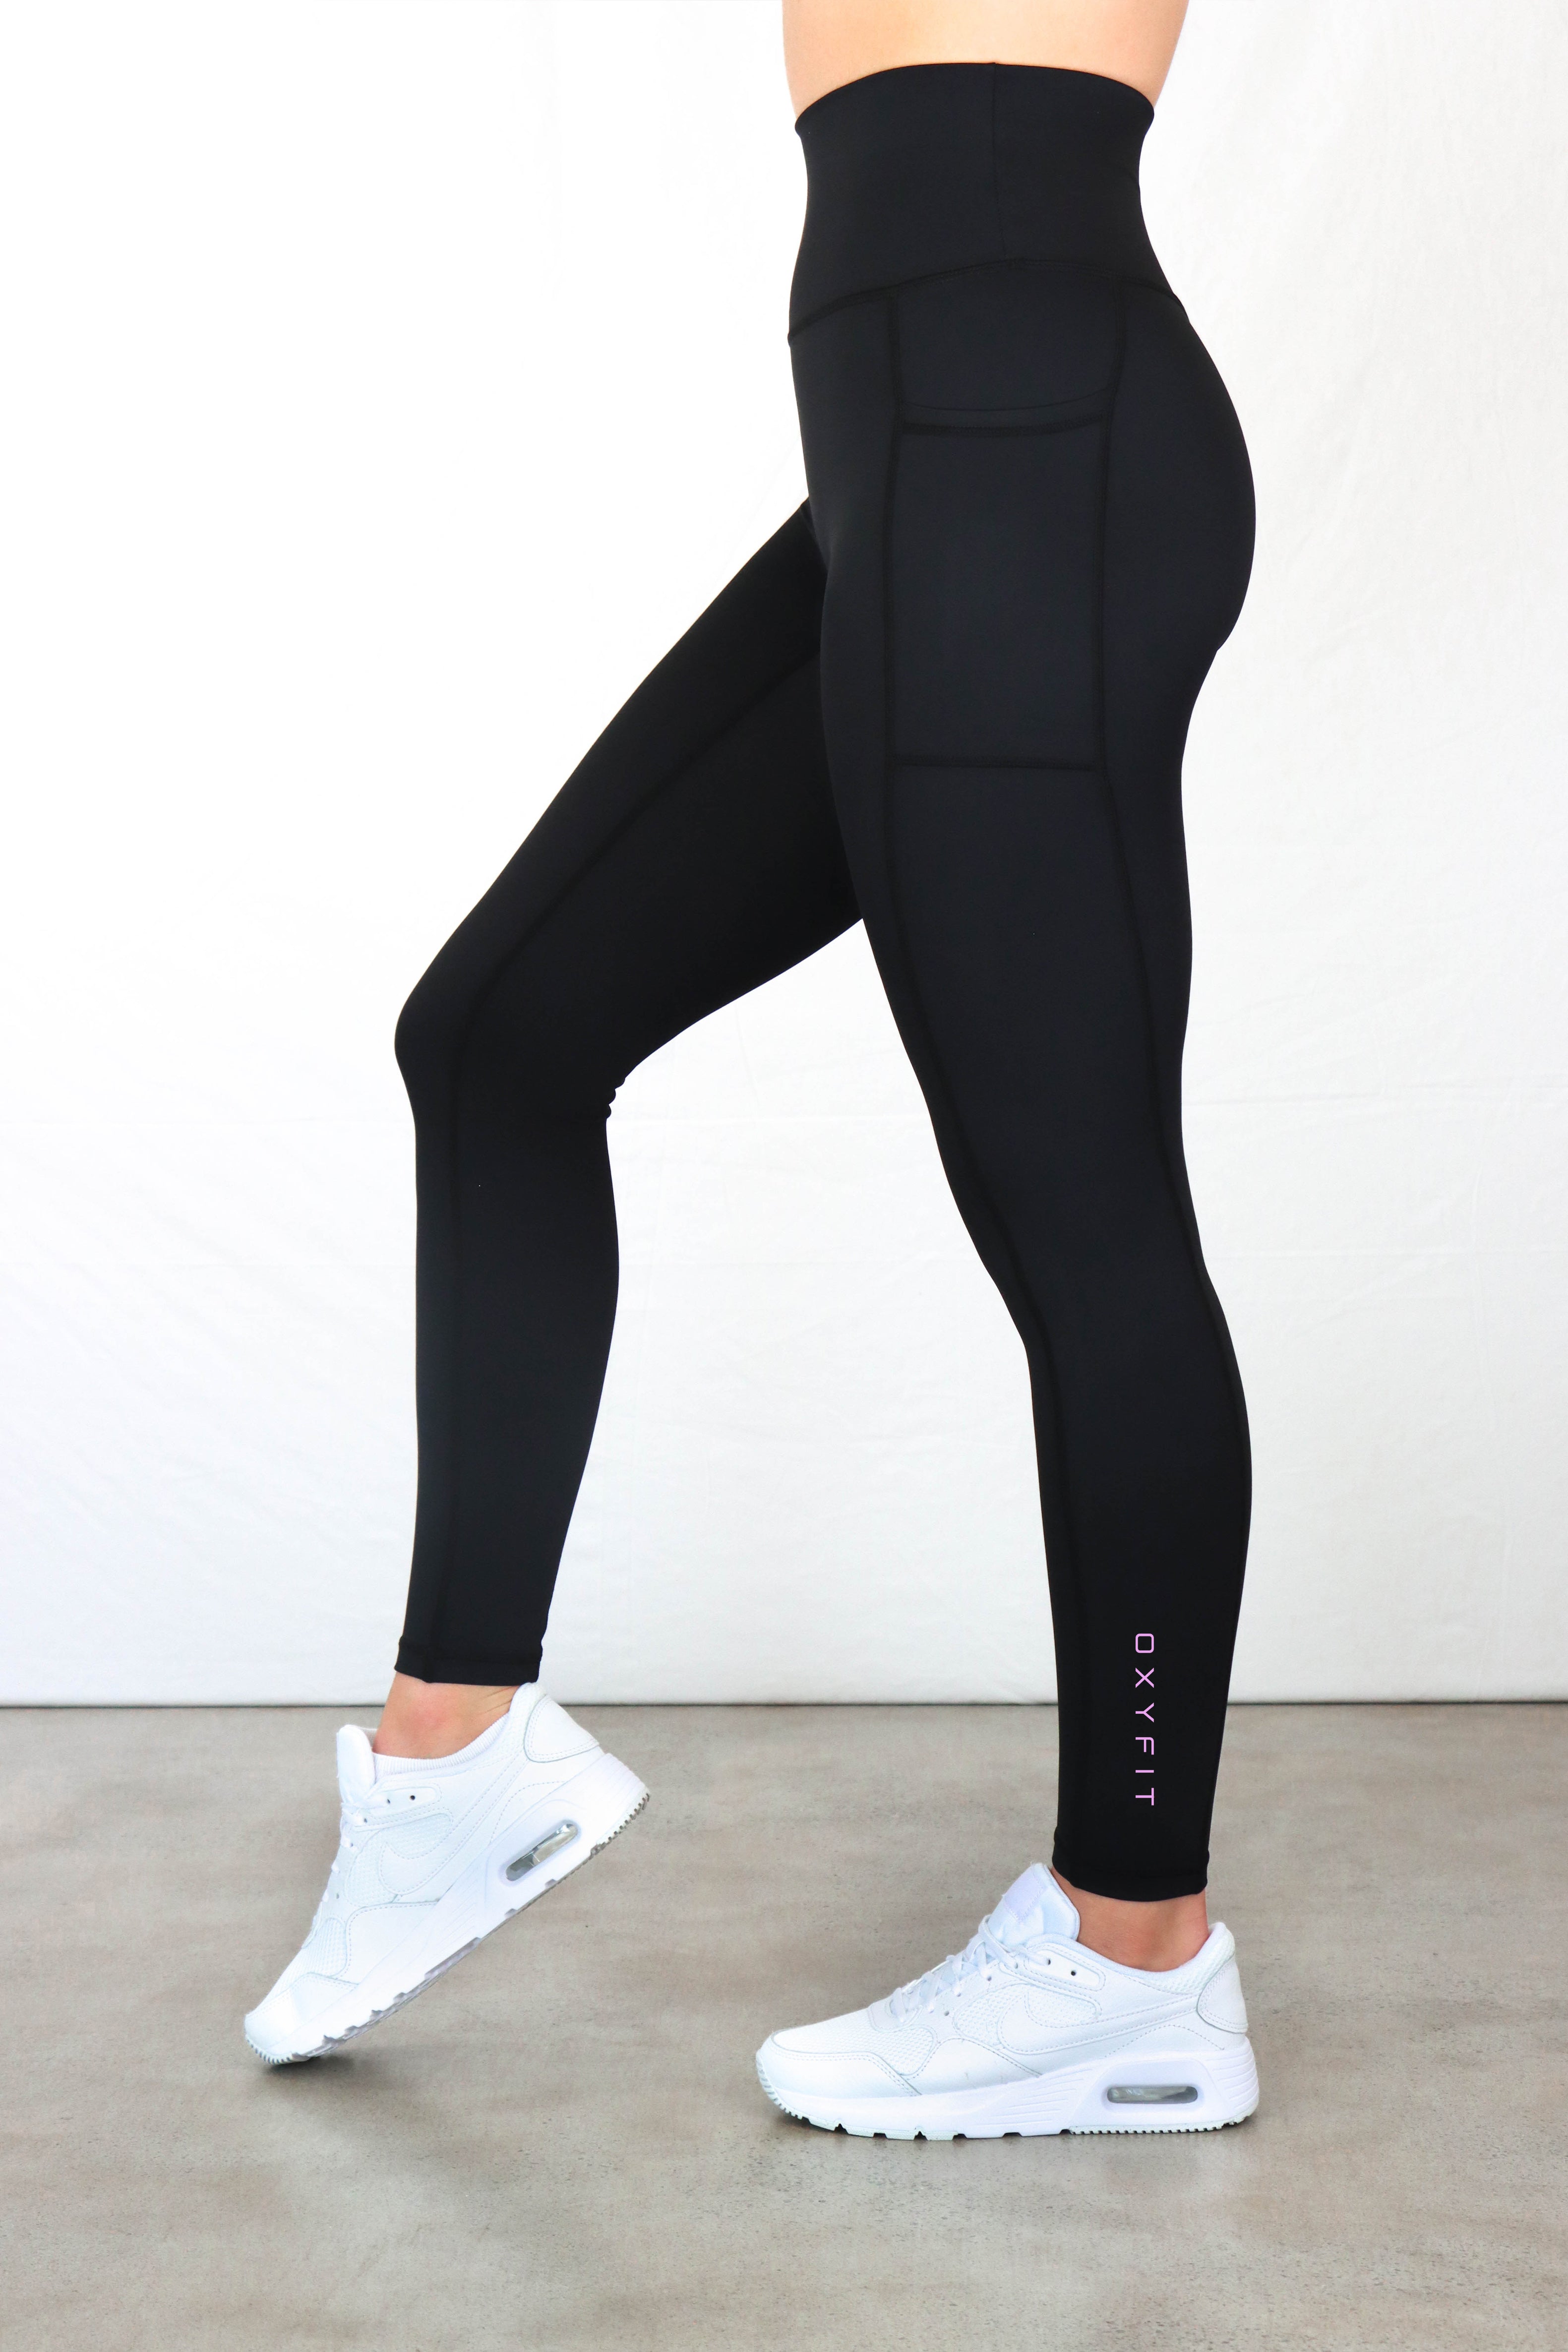 ALONG FIT Yoga Pants for Women with Pockets, Compression Workout Leggings  Tummy | eBay